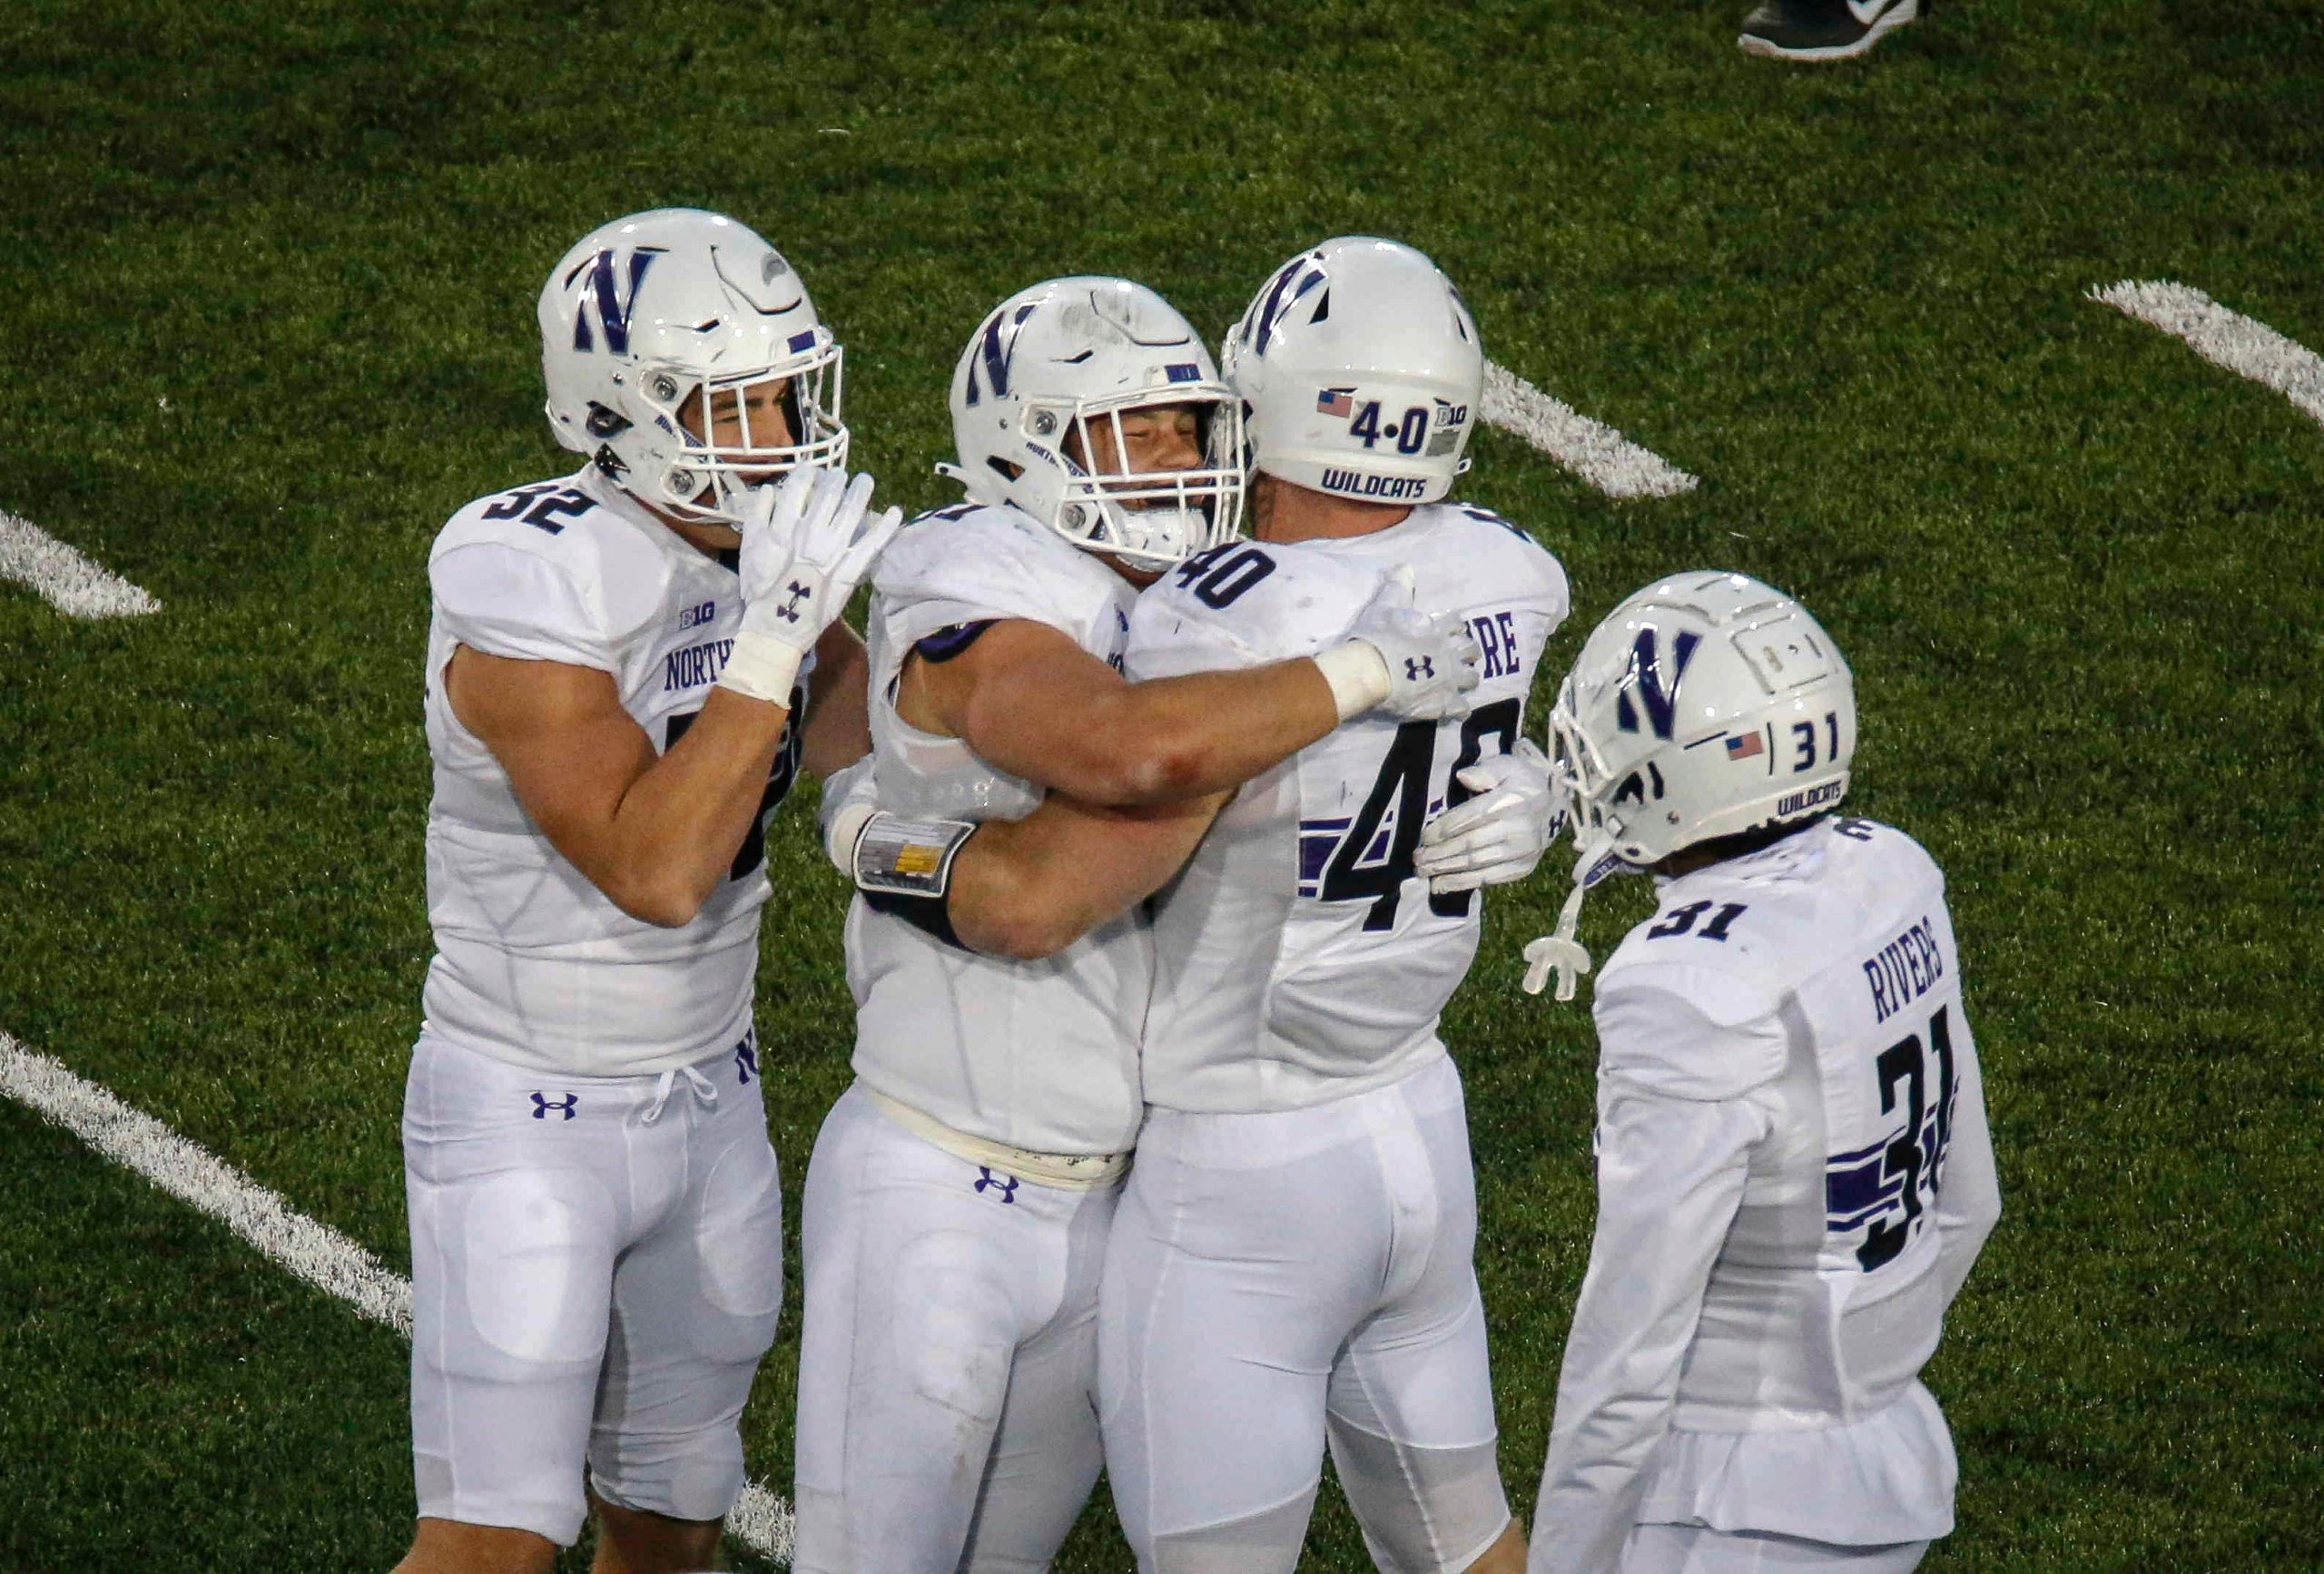 Members of the Northwestern defense celebrate after pulling down an interception late in the game against Iowa to seal the Wildcats' 21-20 win at Kinnick Stadium in Iowa City on Saturday, Oct. 31, 2020.